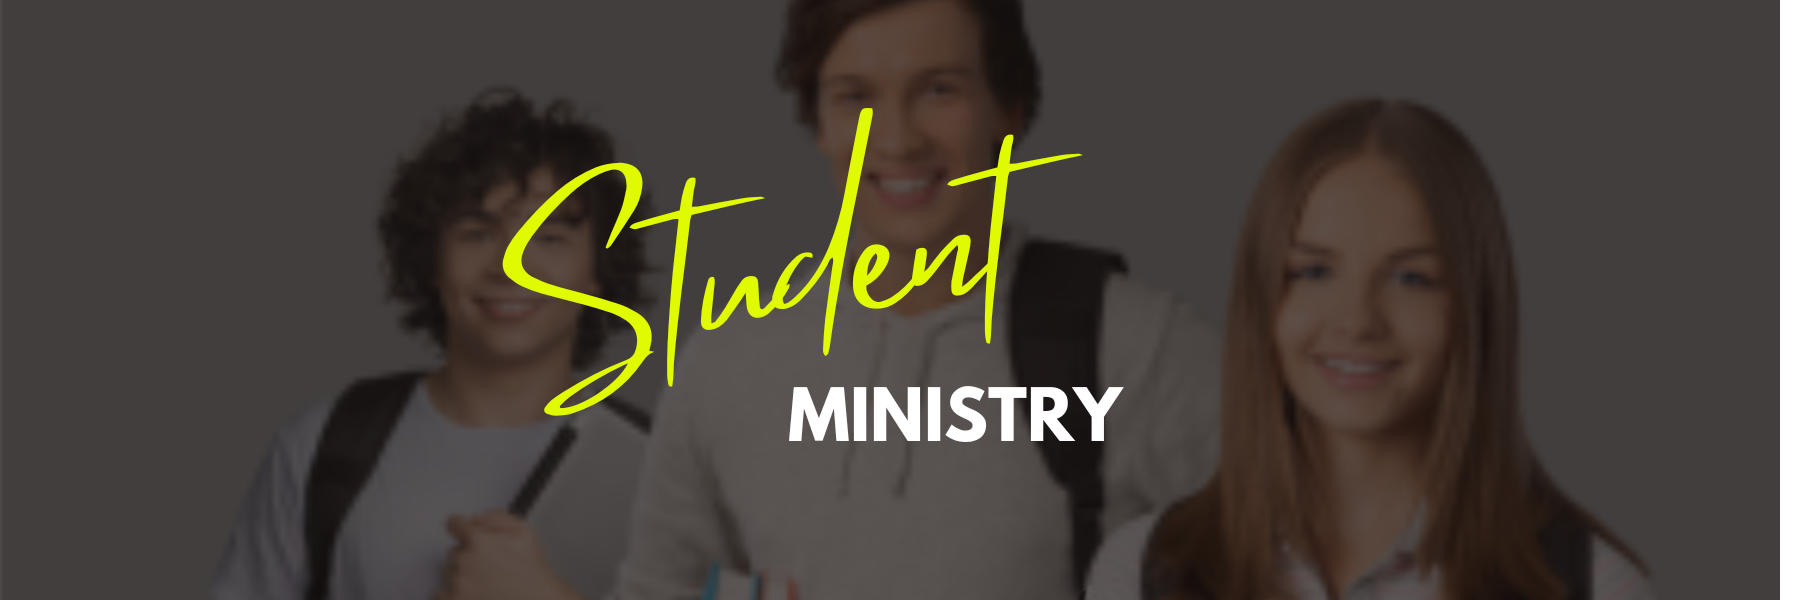 Student Youth Ministry